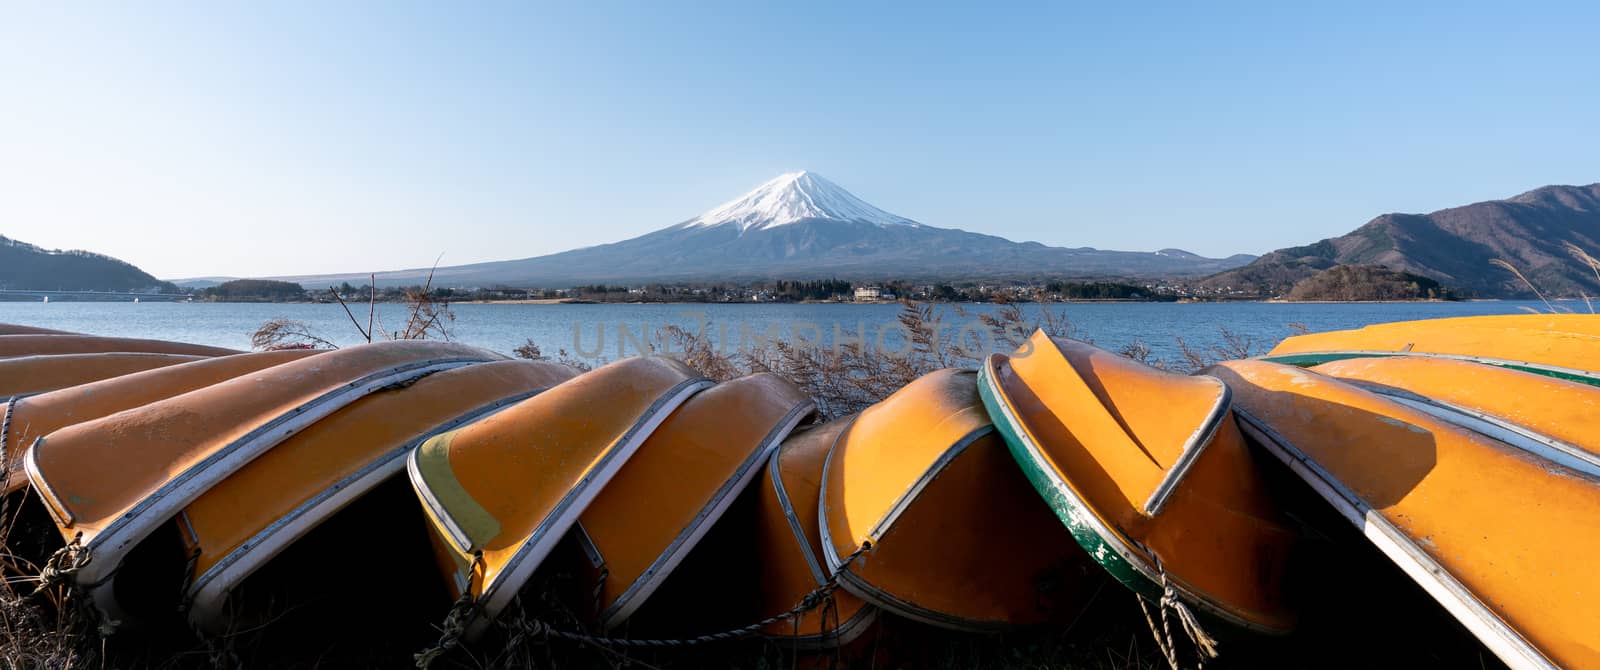 View of Mt. Fuji or Fuji-san with yellow boat and clear sky at l by sirawit99